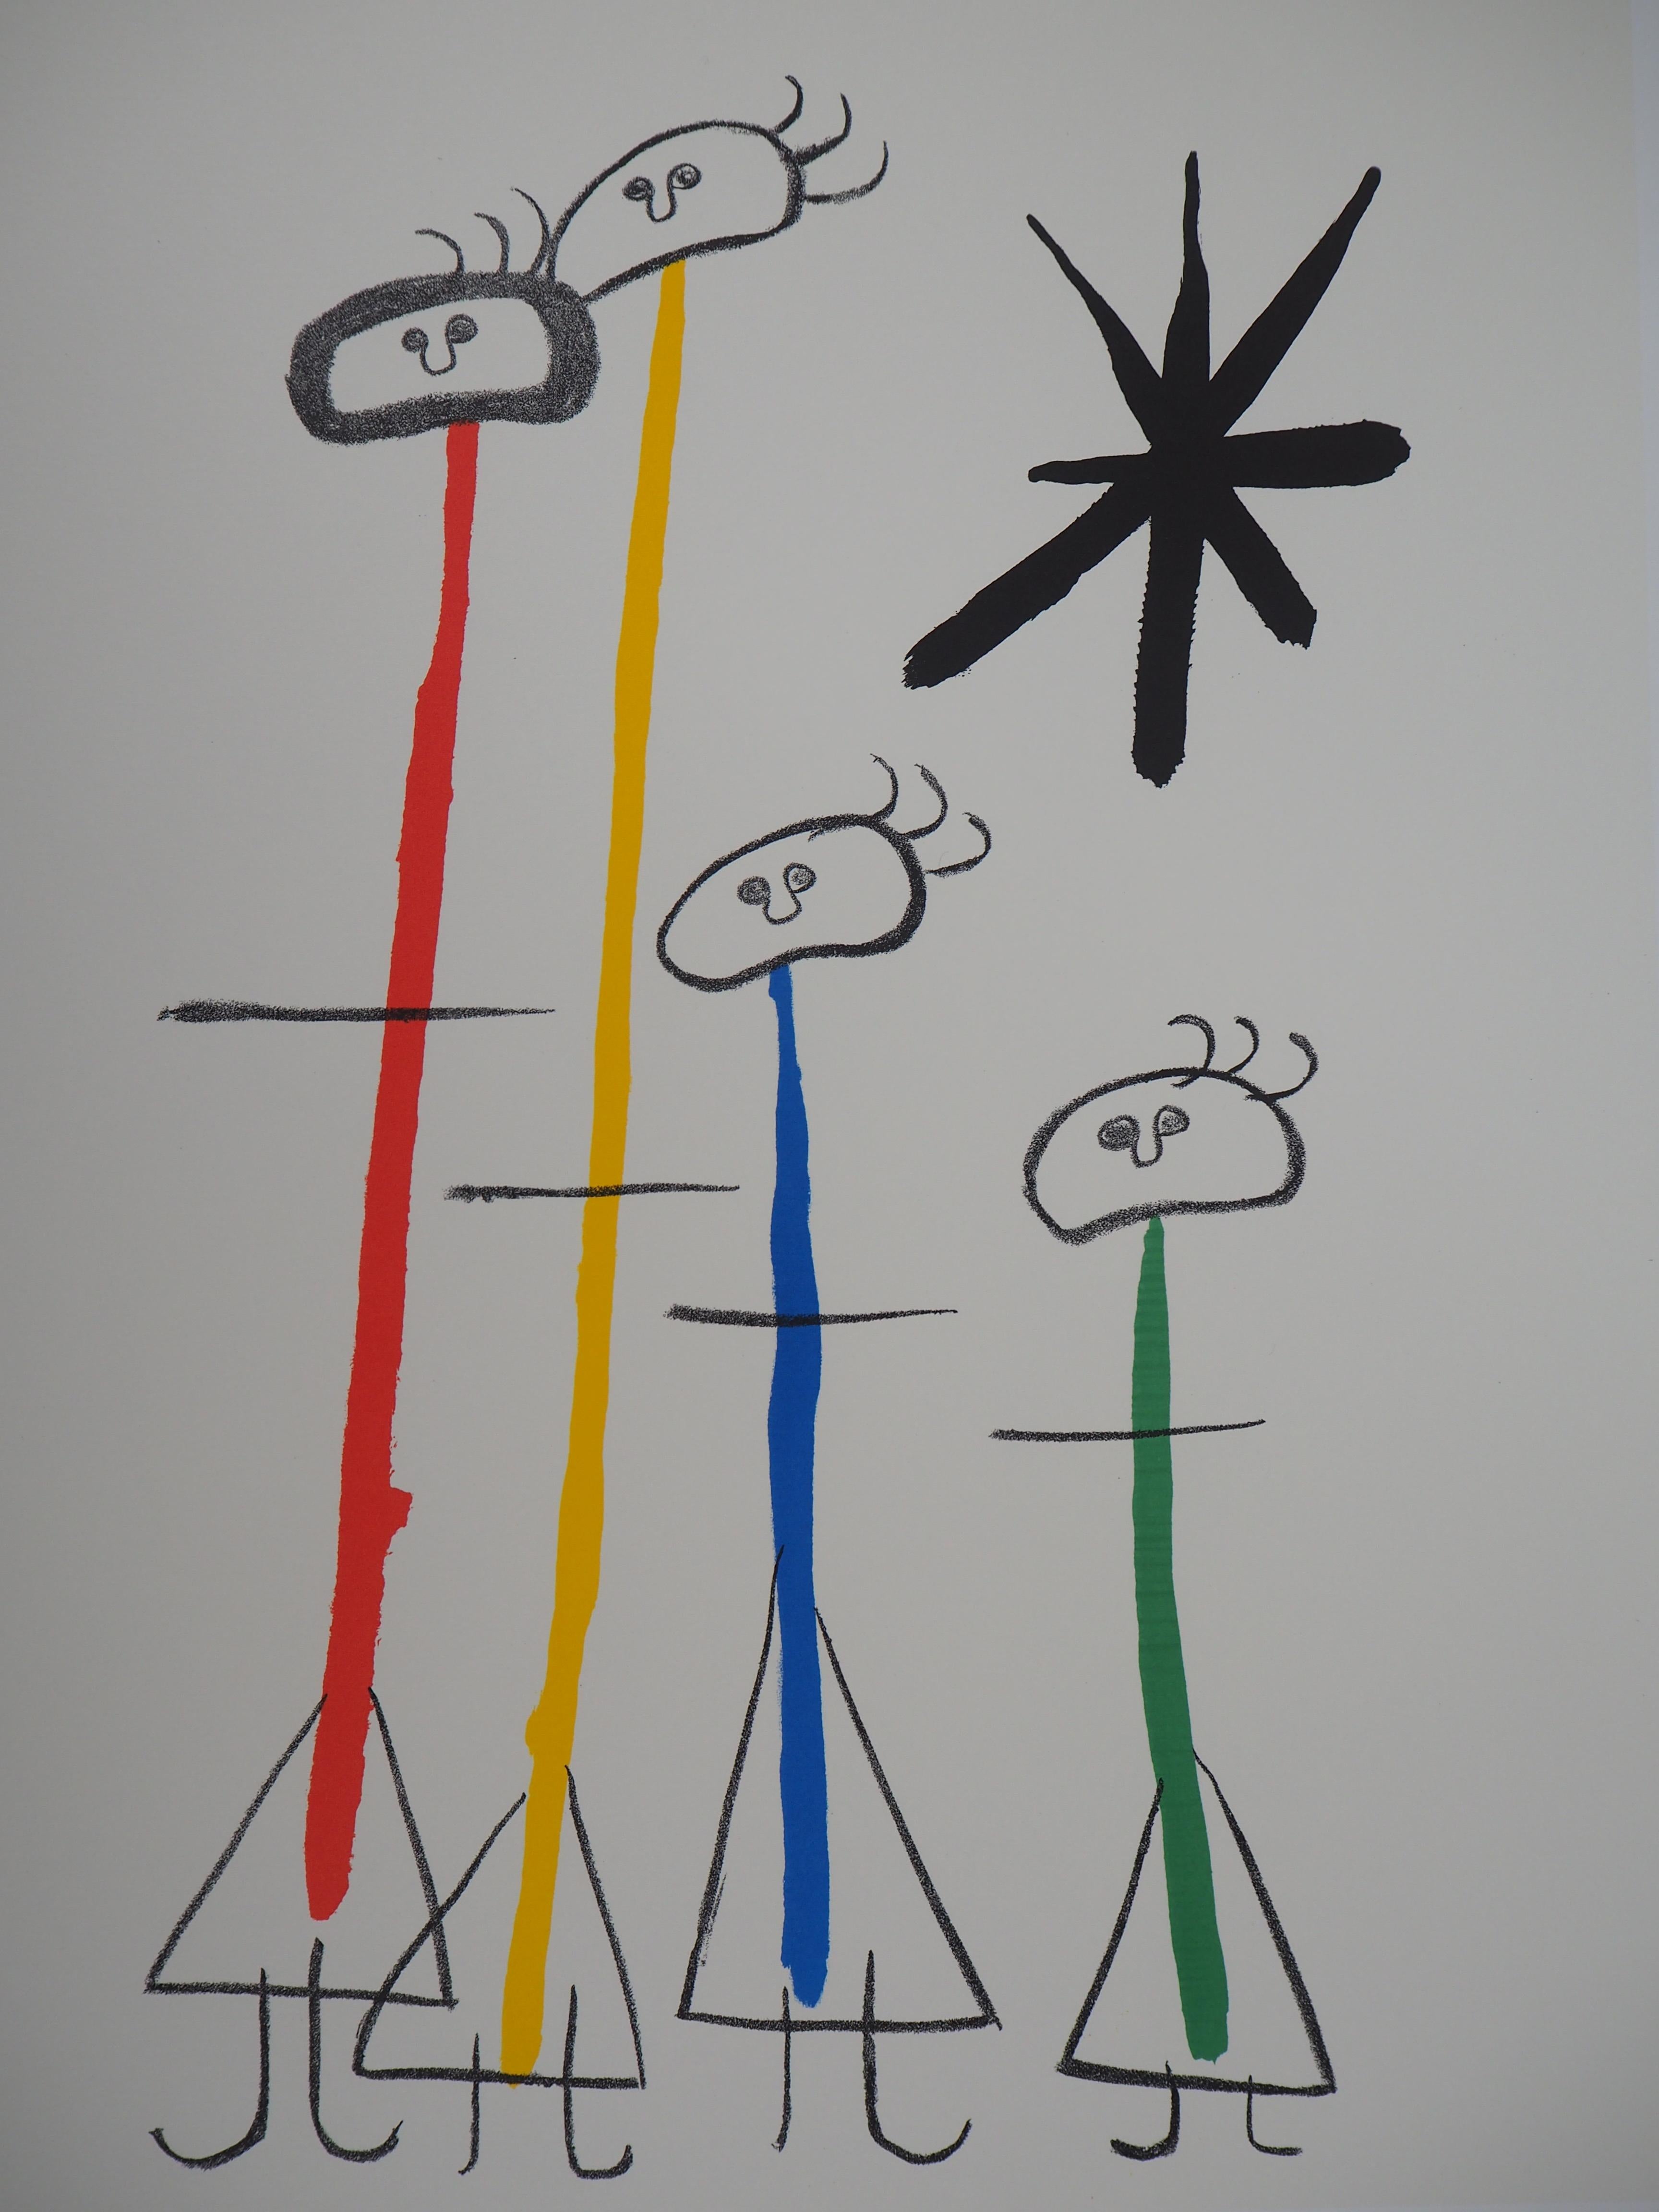 Family with a Star - Lithograph - Abstract Print by (after) Joan Miró